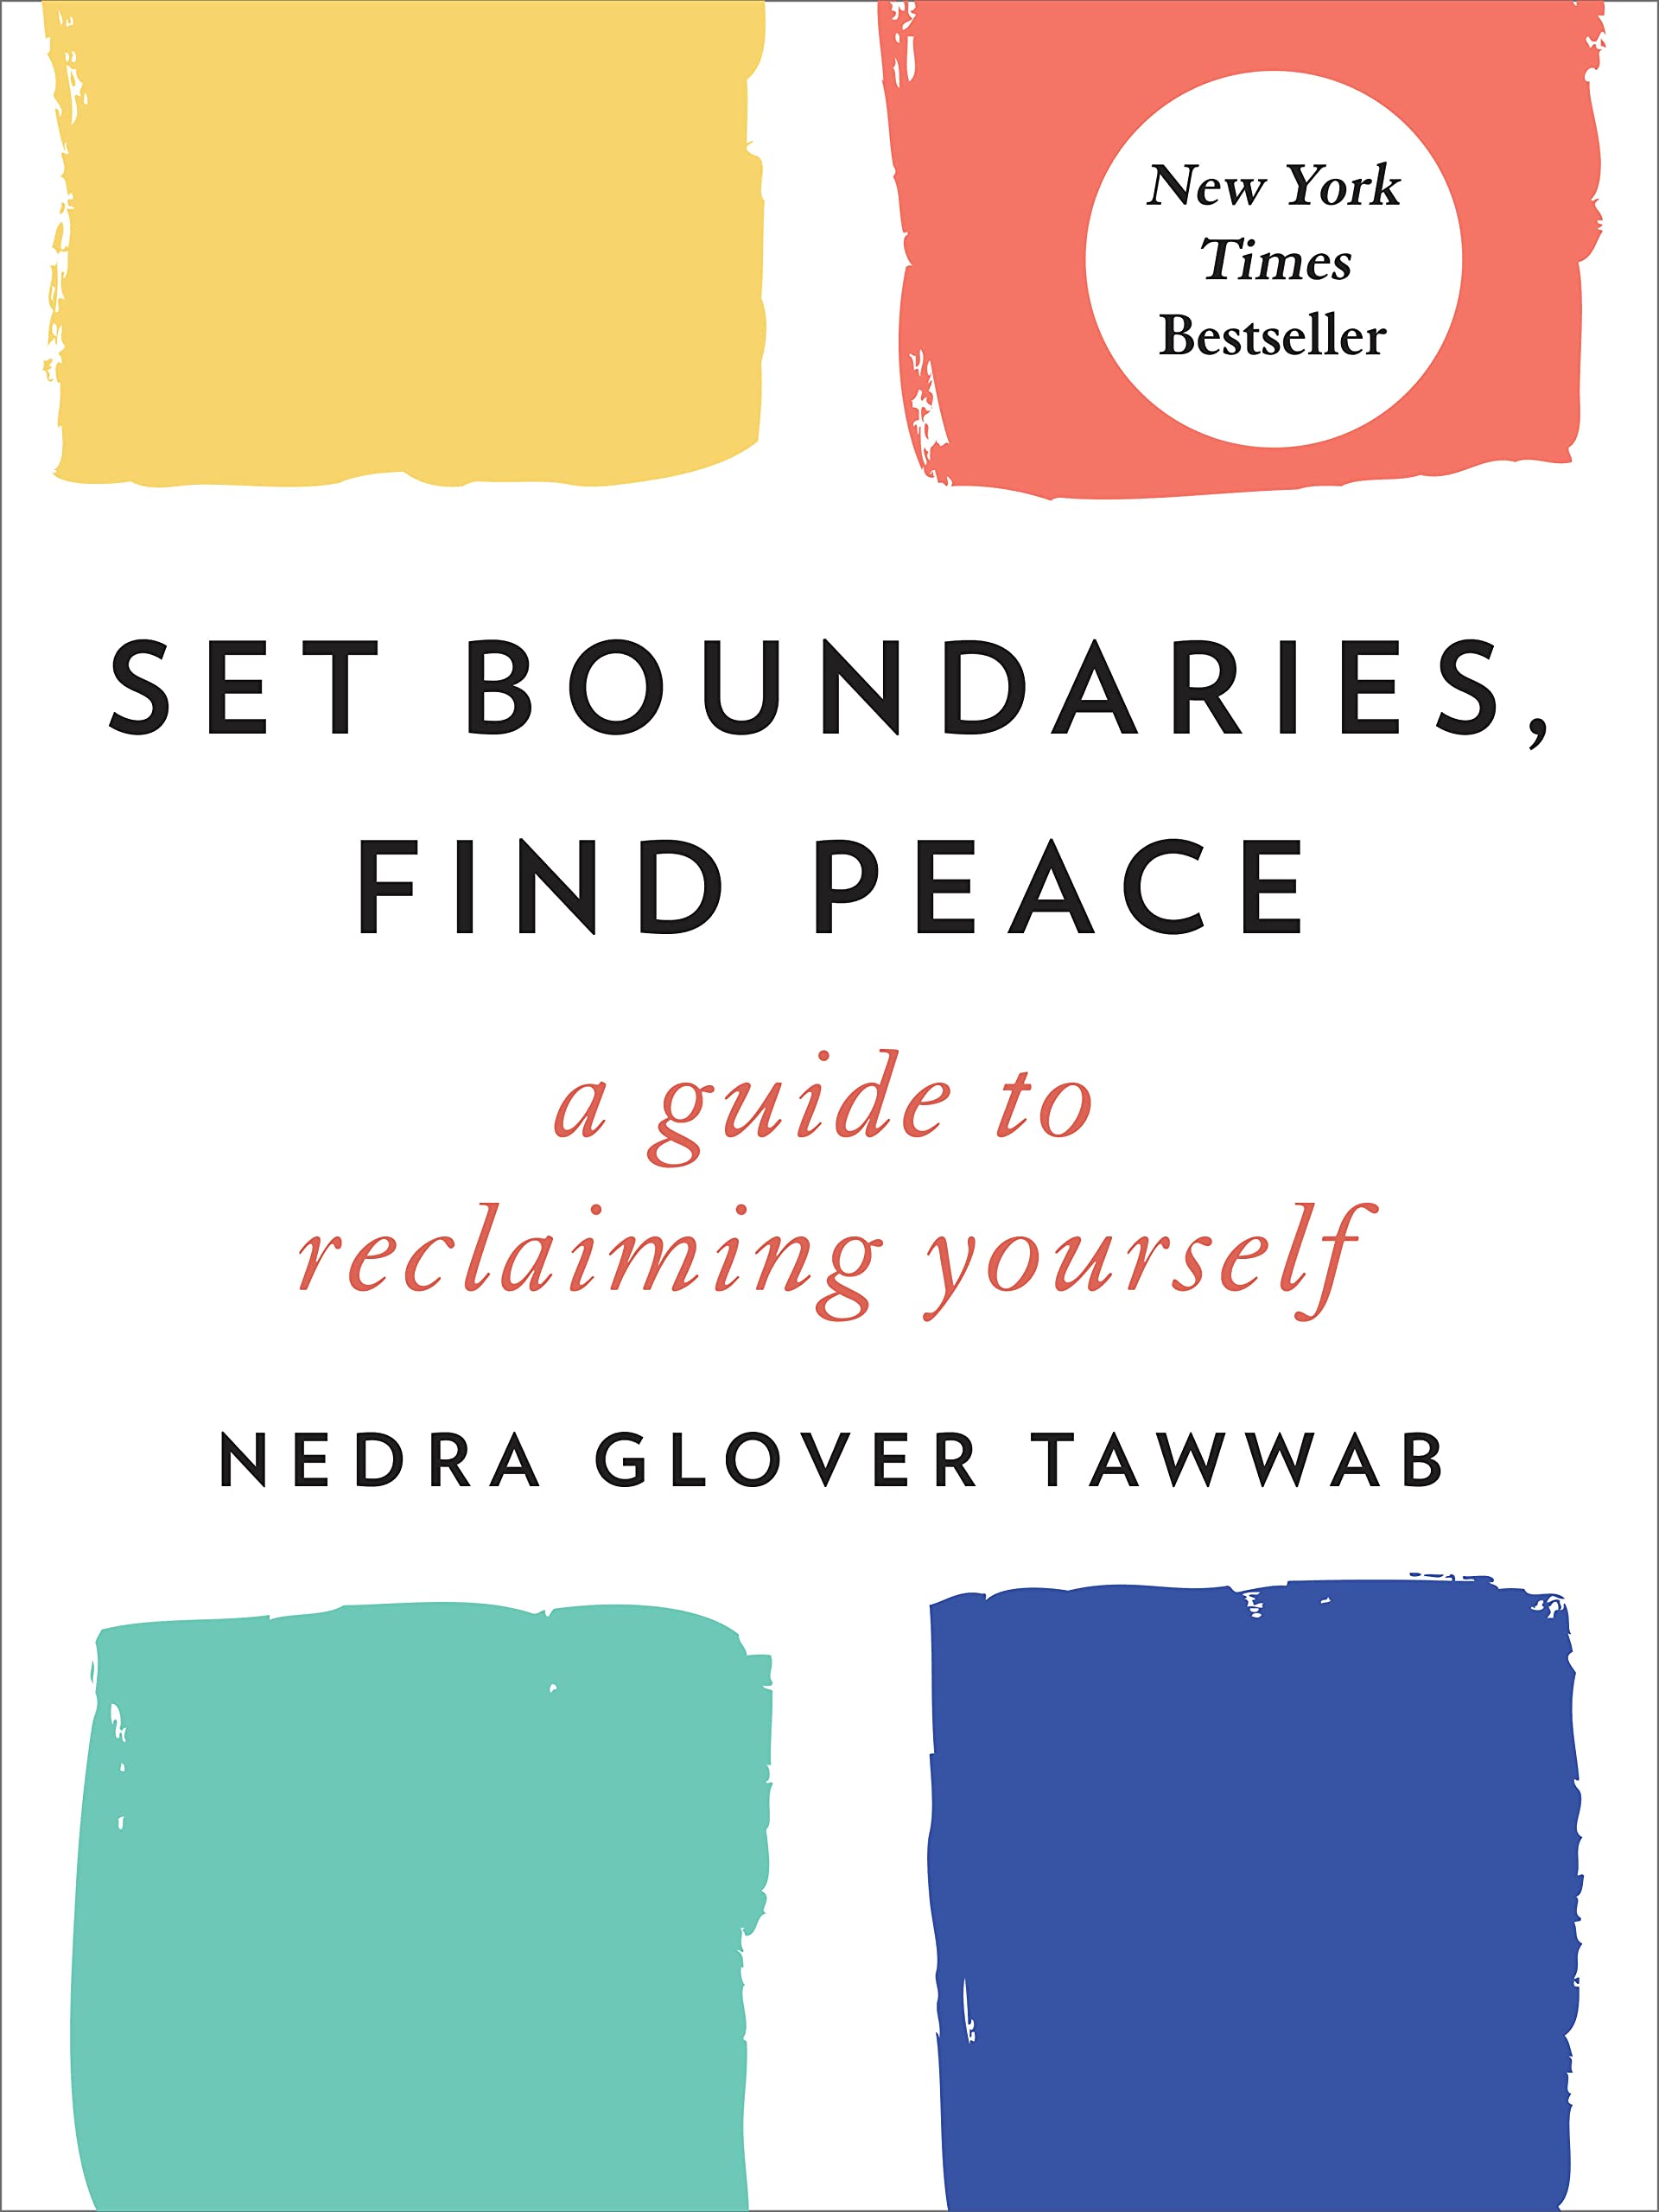 Set Boundaries, Find Peace (book cover)